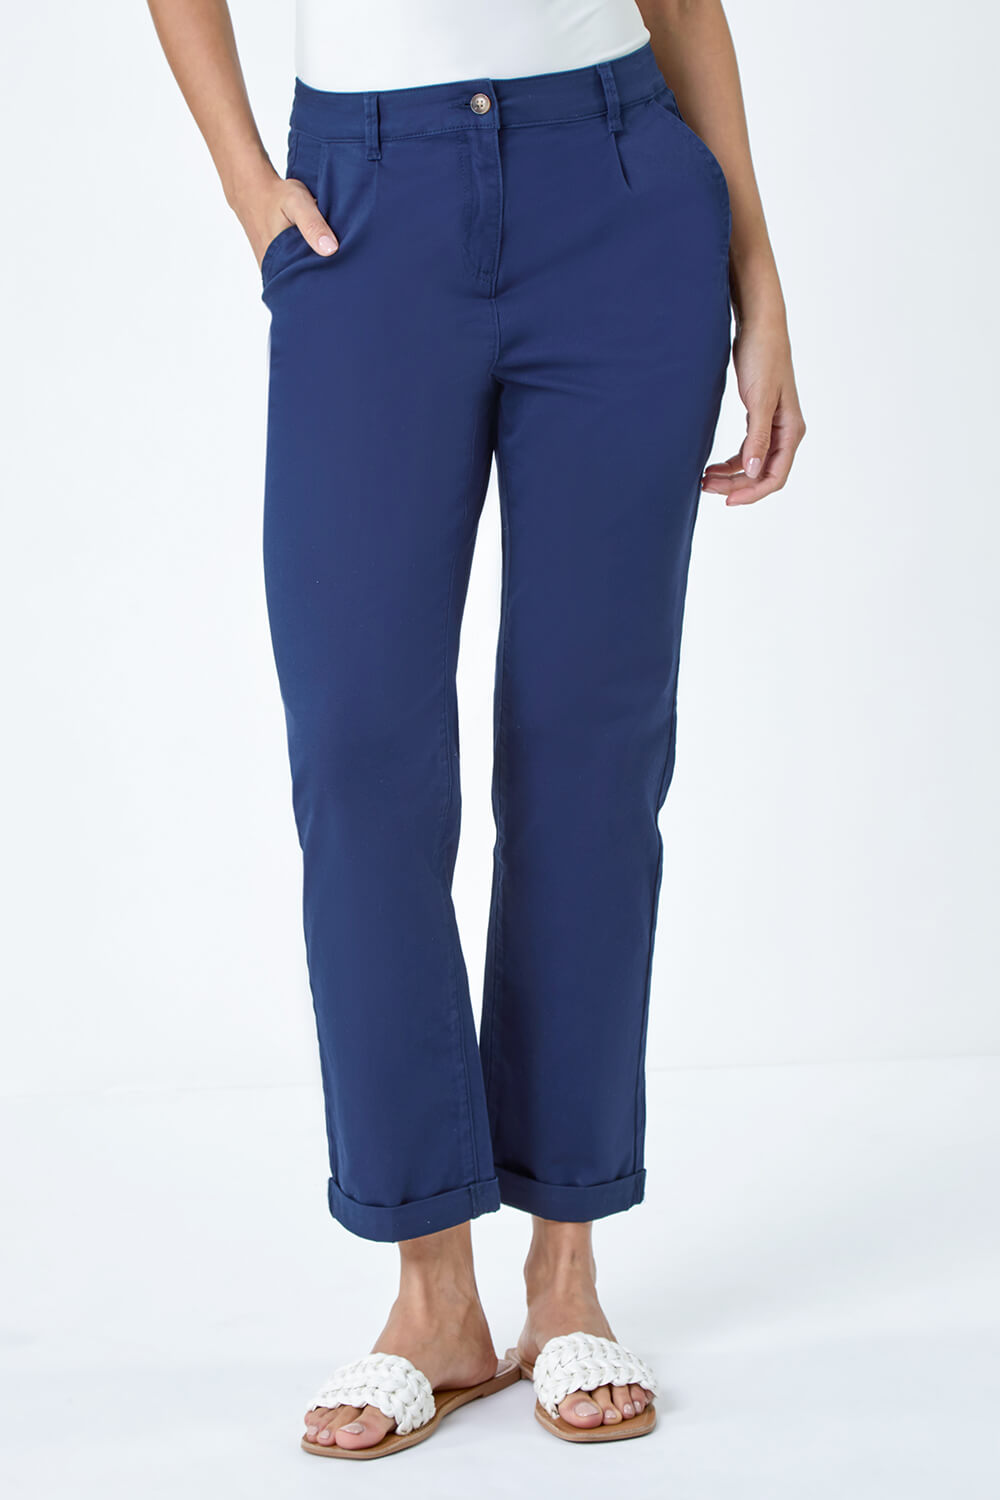 Navy  Cotton Blend Washed Chino Trousers, Image 4 of 5